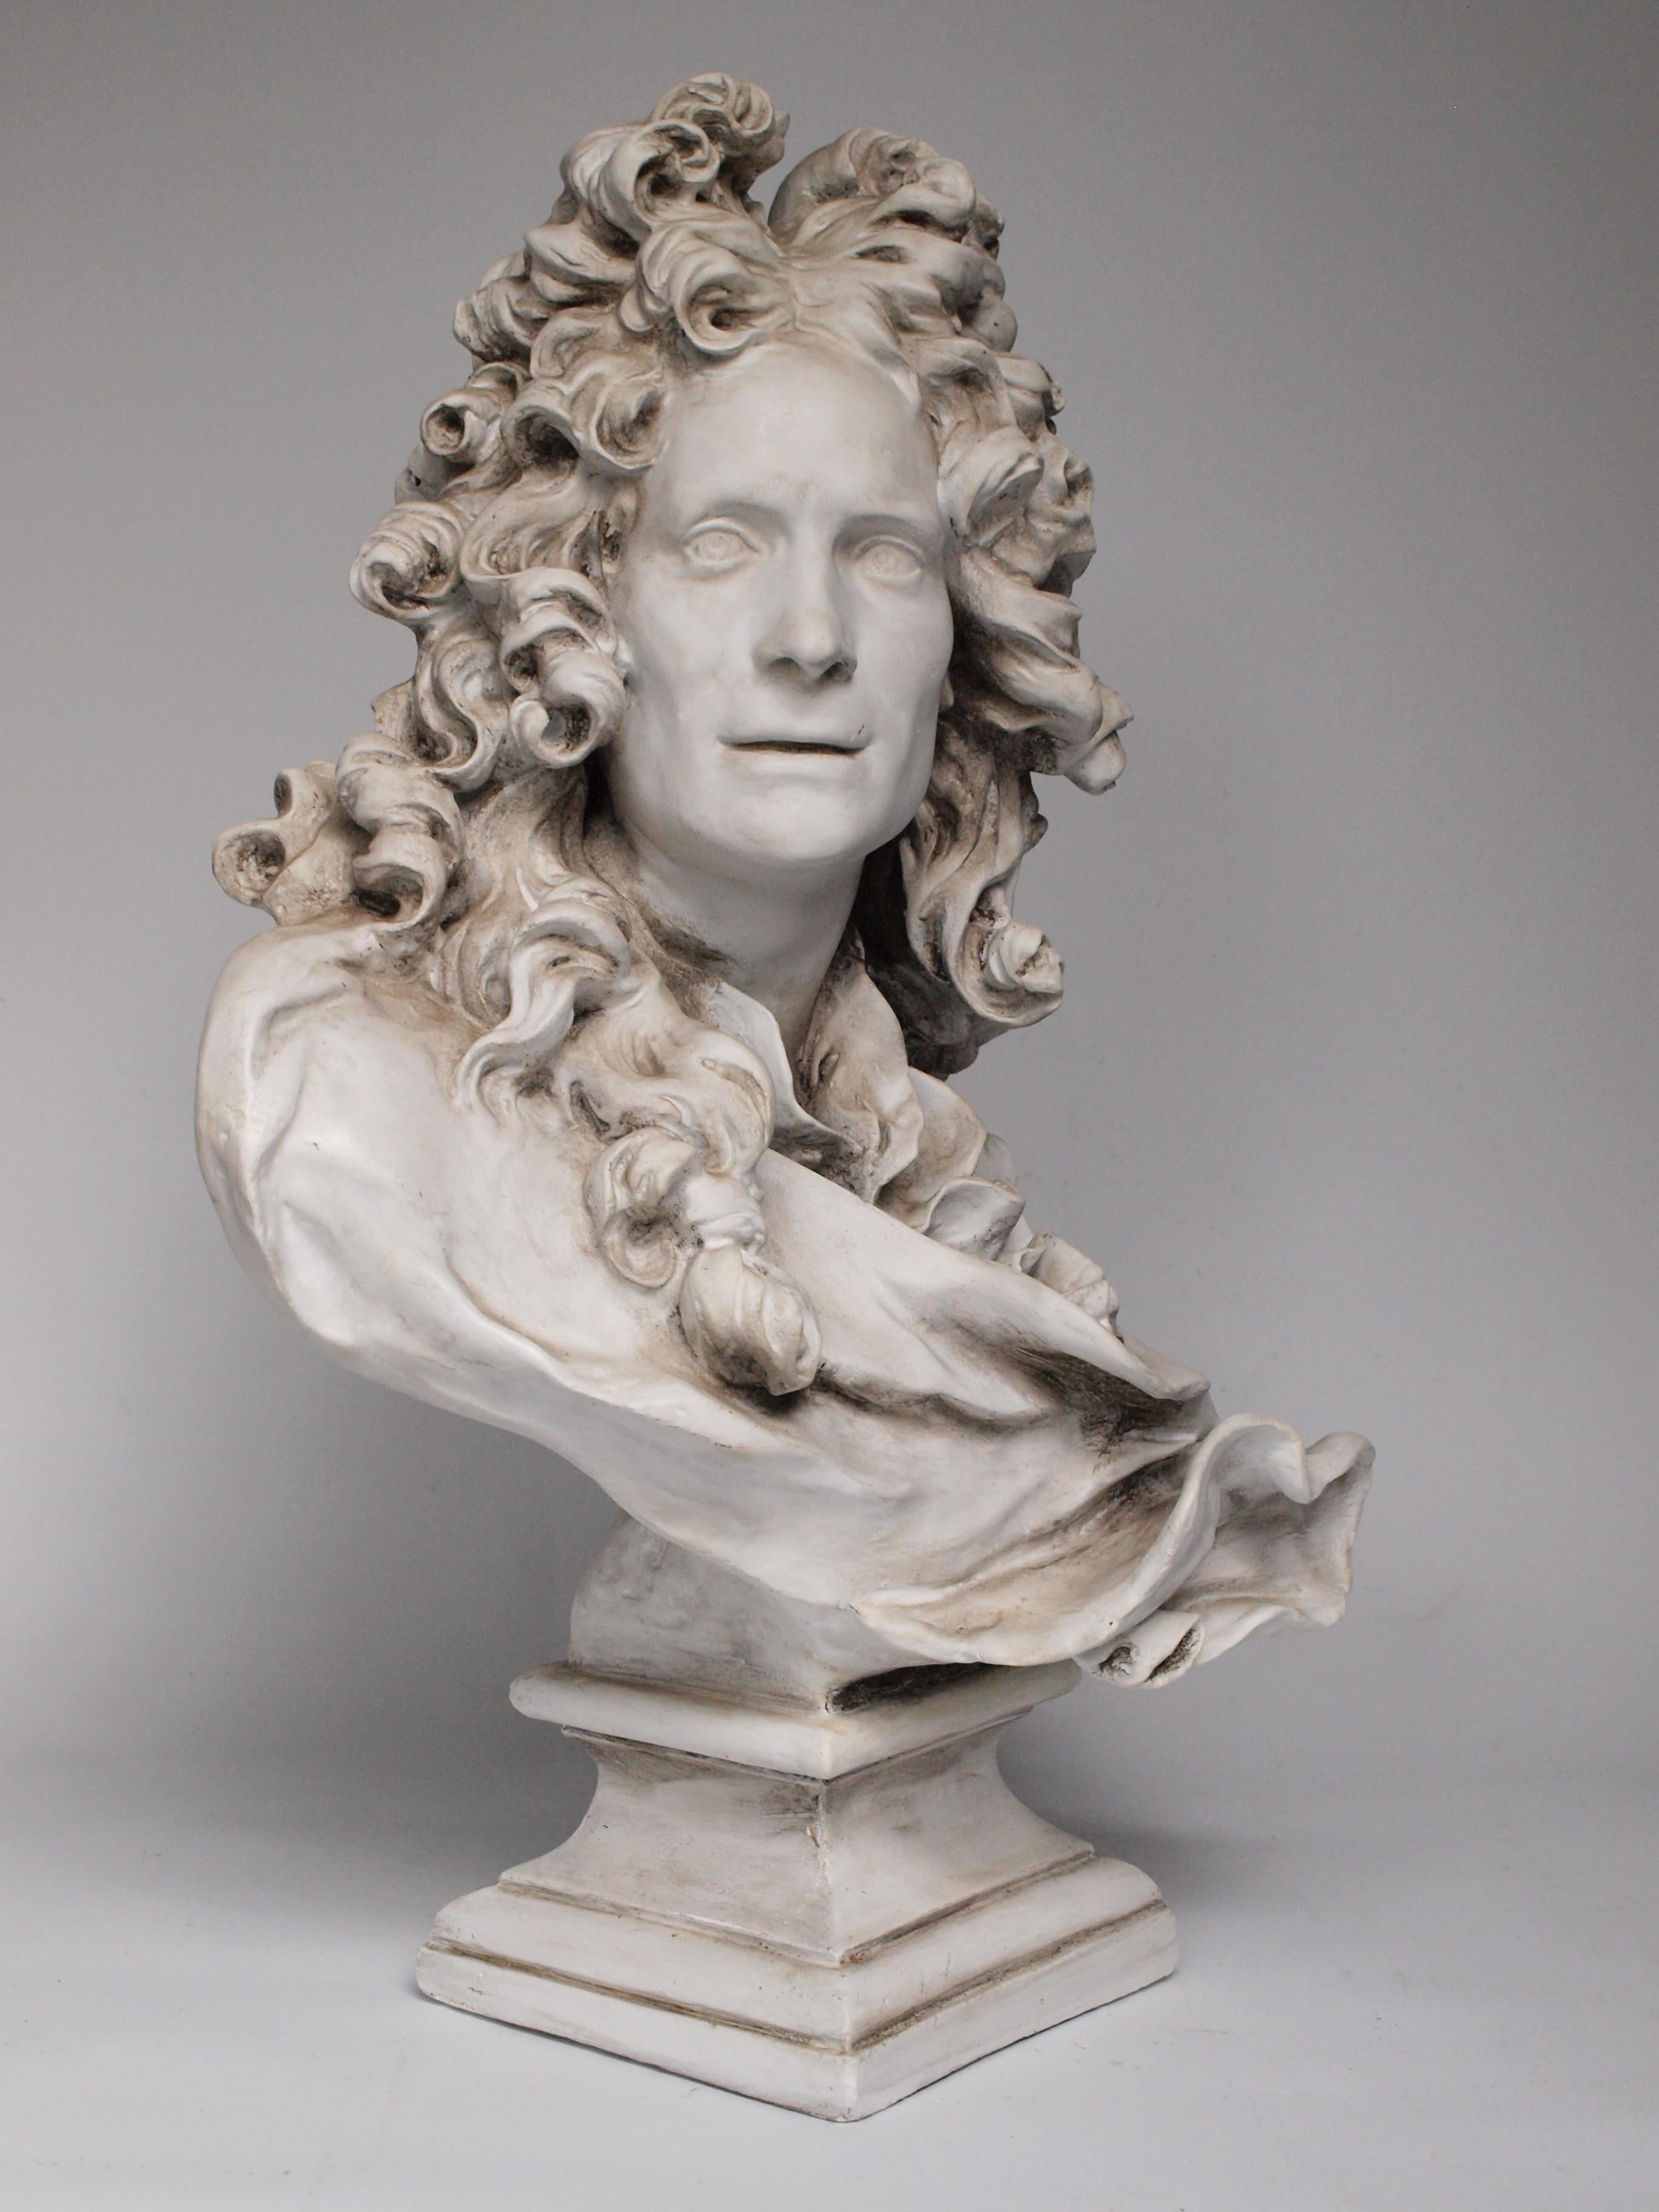 A plaster bust of a gentleman with flowing locks in the 17th century French Baroque manner of Bernini.
 